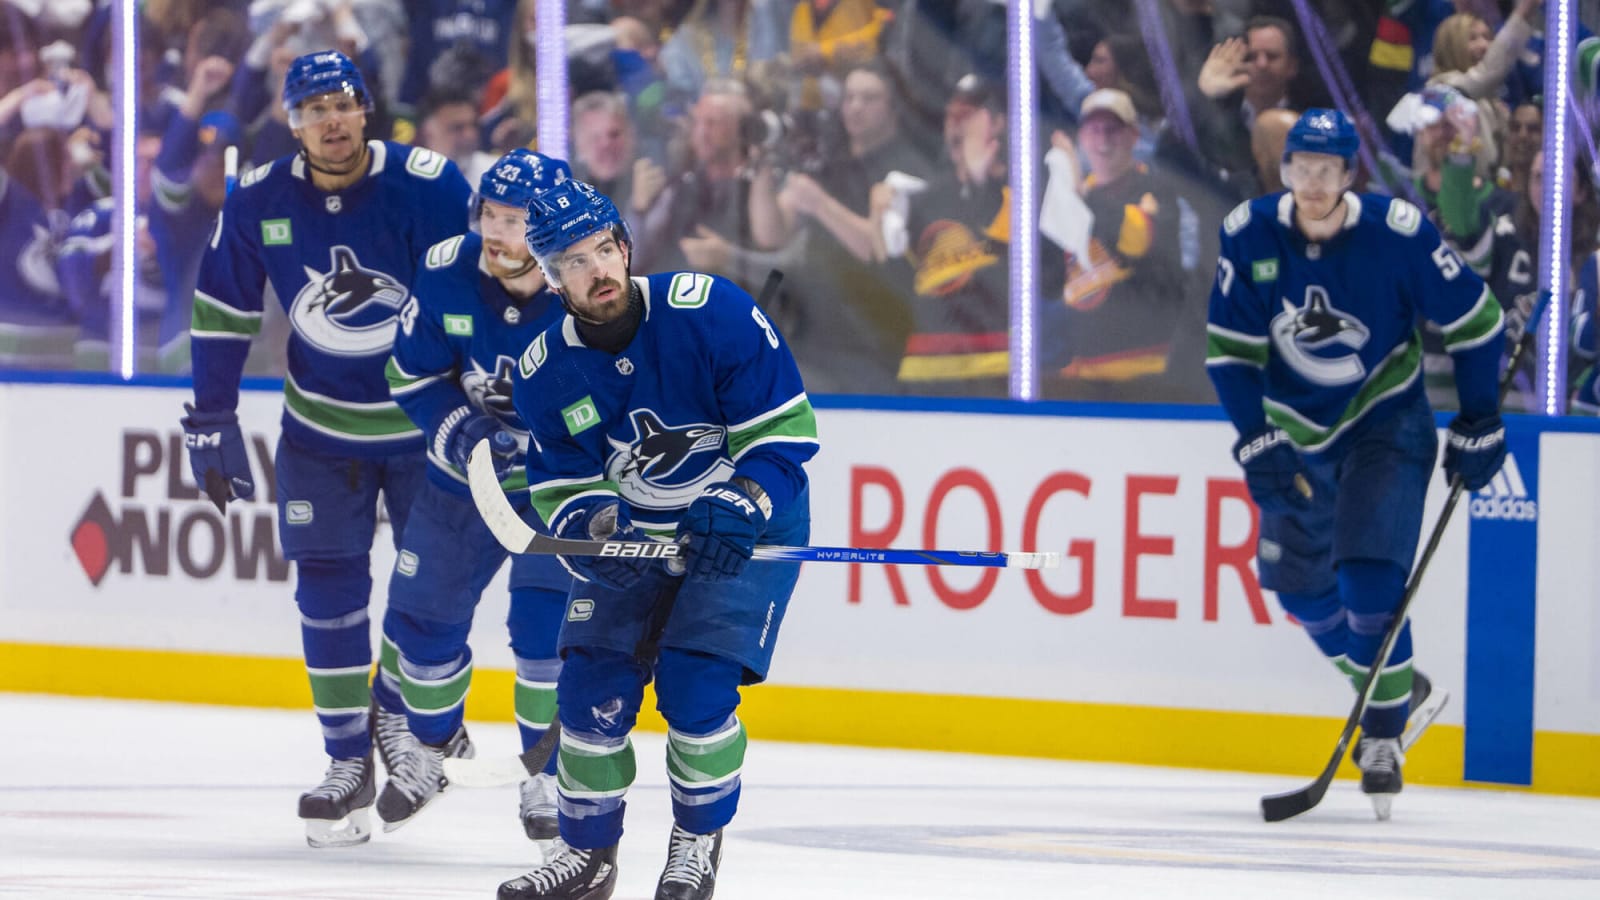 ‘You can feel and hear the energy’: Marc Crawford talks Canucks’ performance in Game 1 vs Edmonton